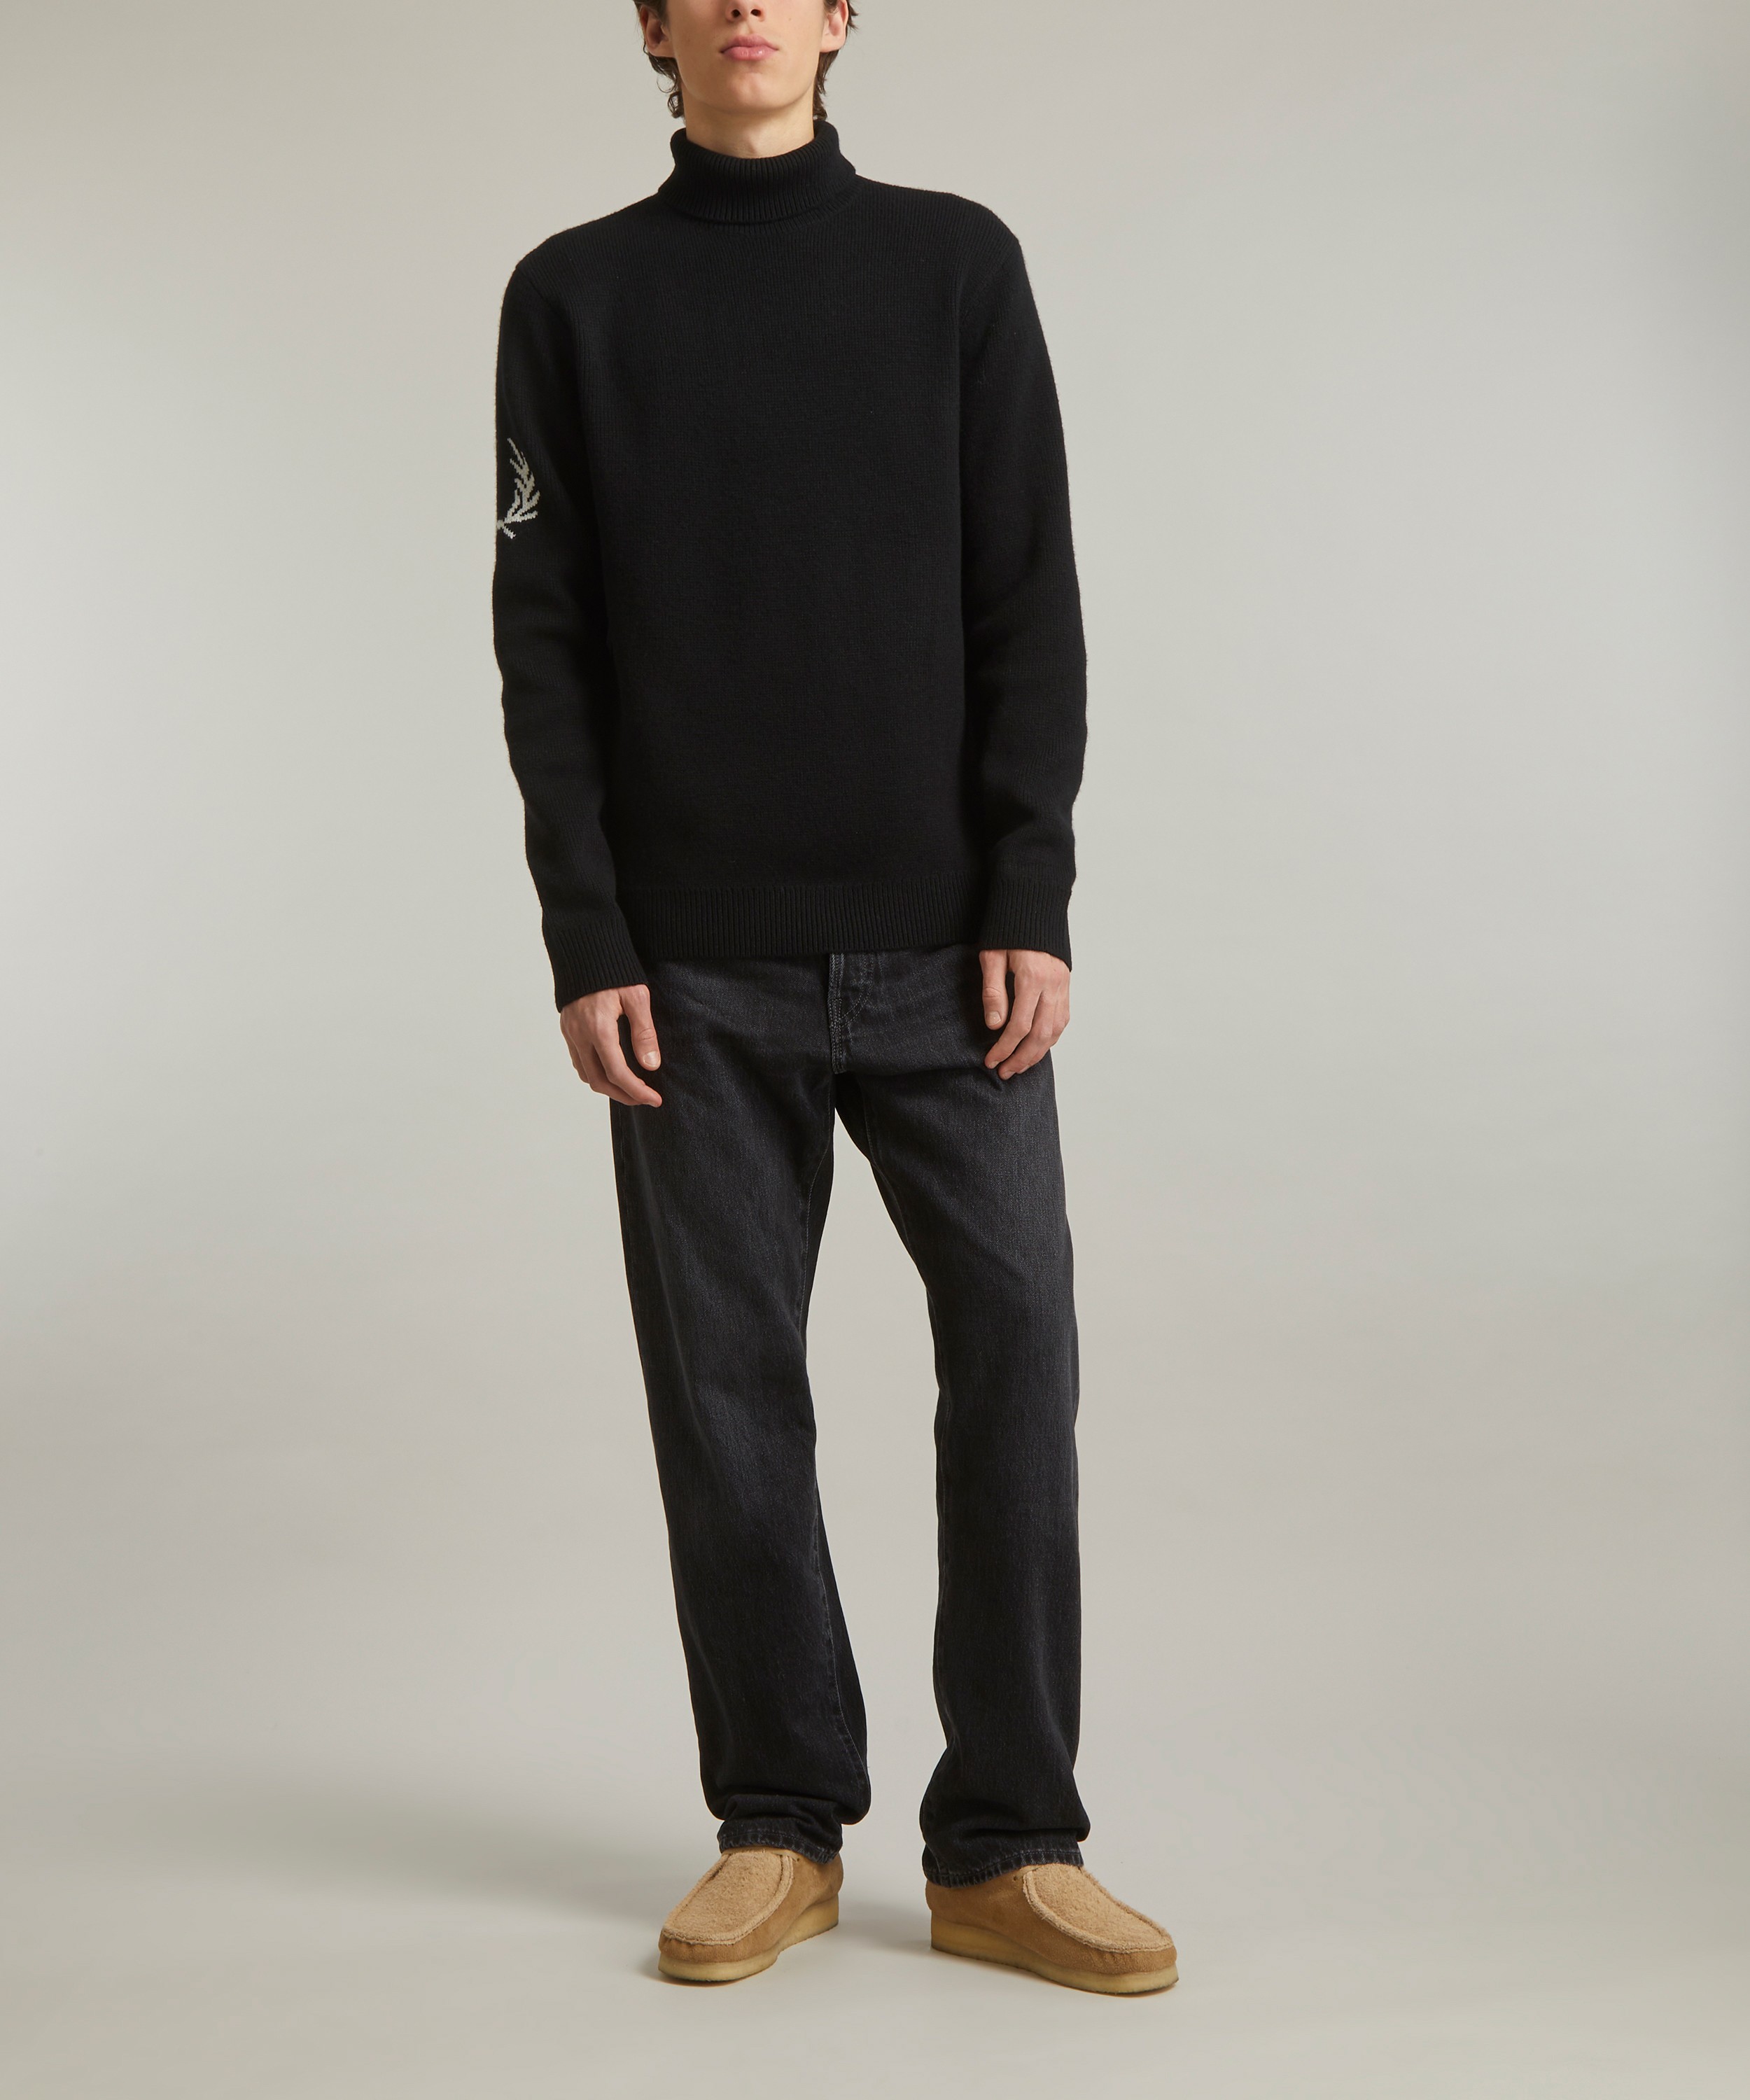 Fred Perry Laurel Wreath Roll-Neck Jumper | Liberty